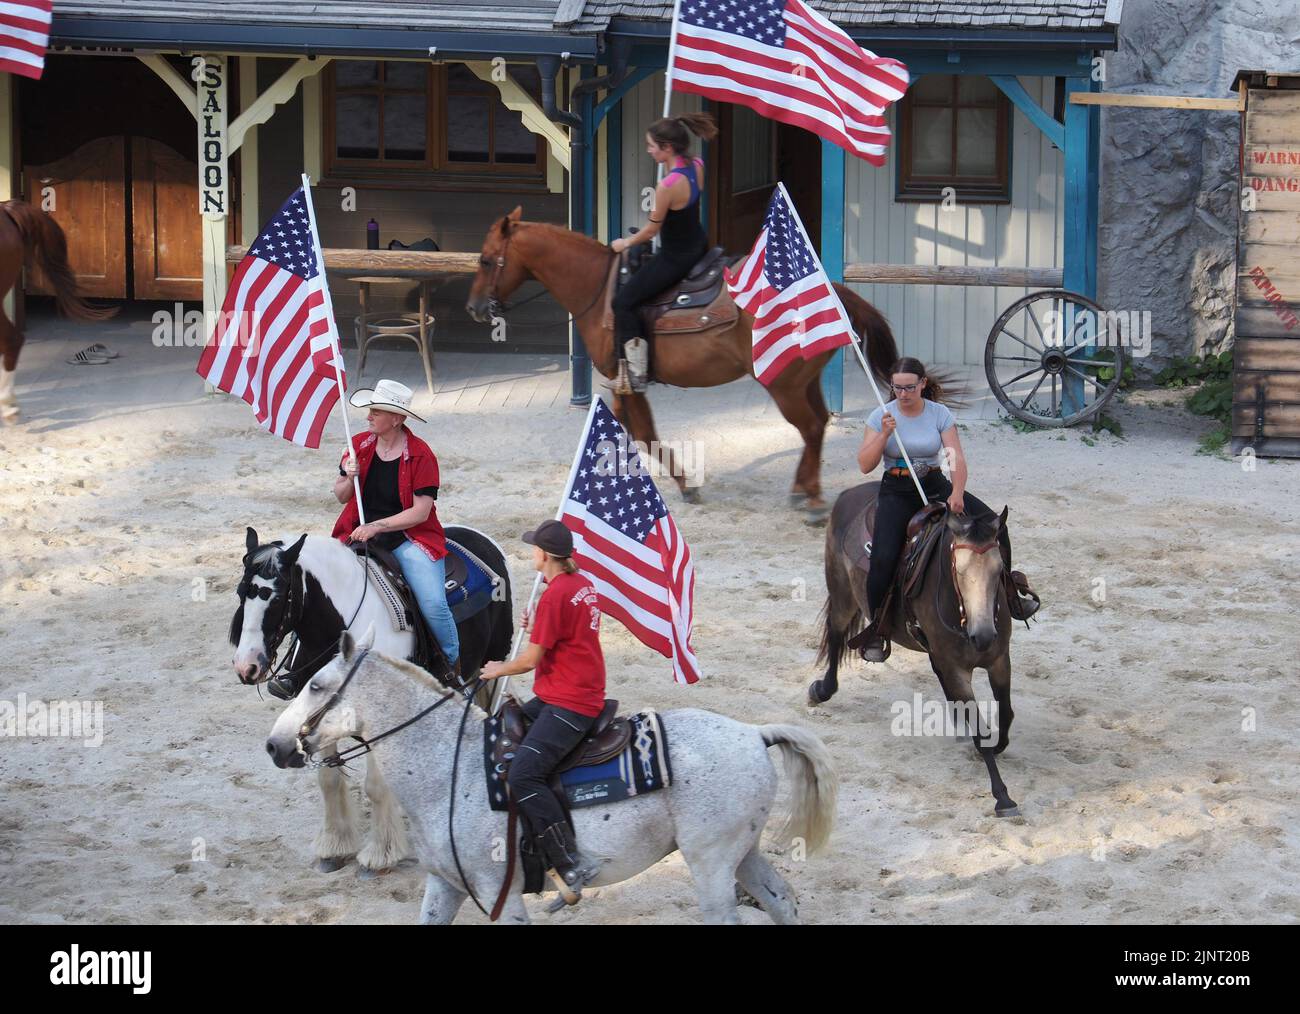 Participants of the Pullman City Equestrian Theater at the rehearsal of the performance. They are holding American flags. Stock Photo